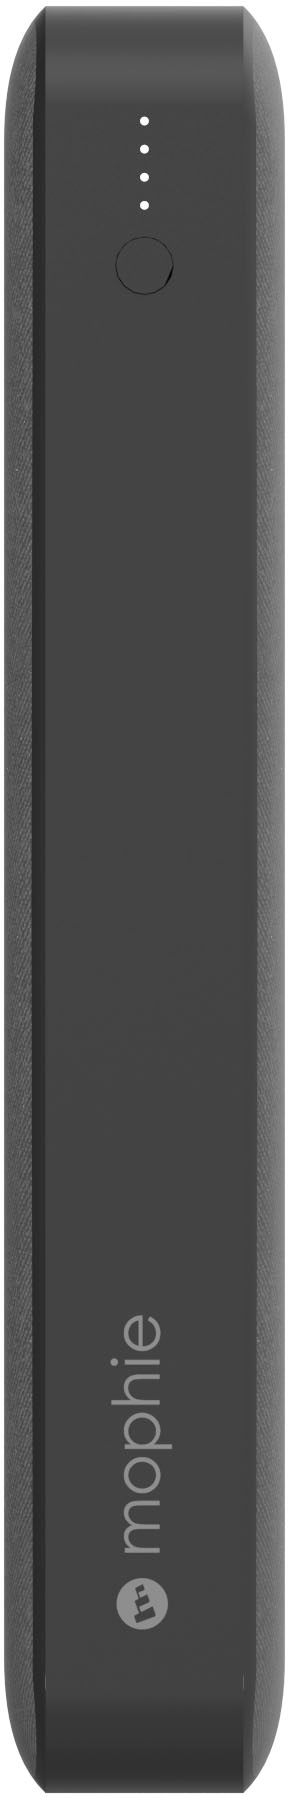 mophie Powerstation Ultra Power Bank 30,000mAh Portable Battery Charger Sky  Blue